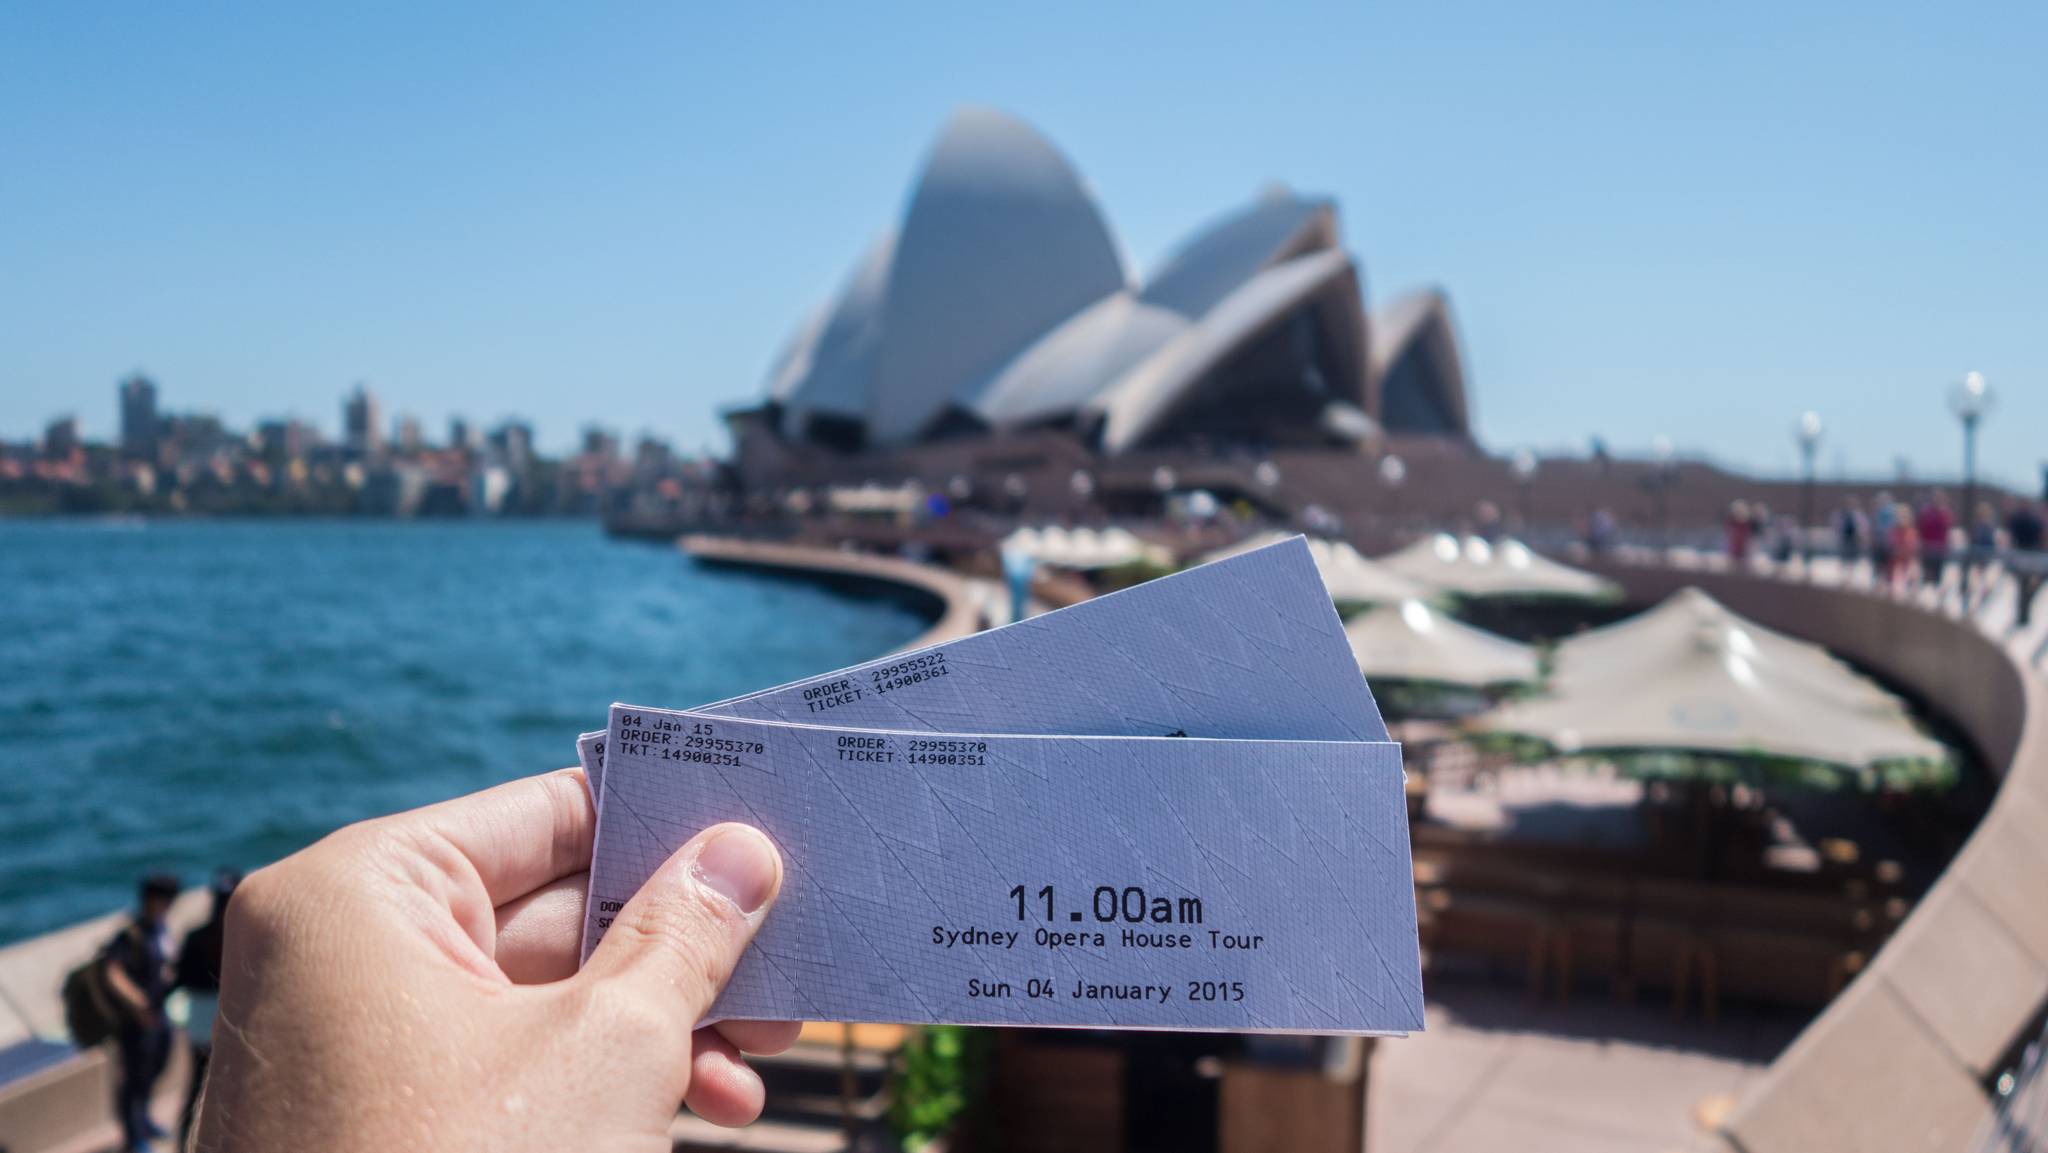 The Sydney Opera House is inviting tourists in